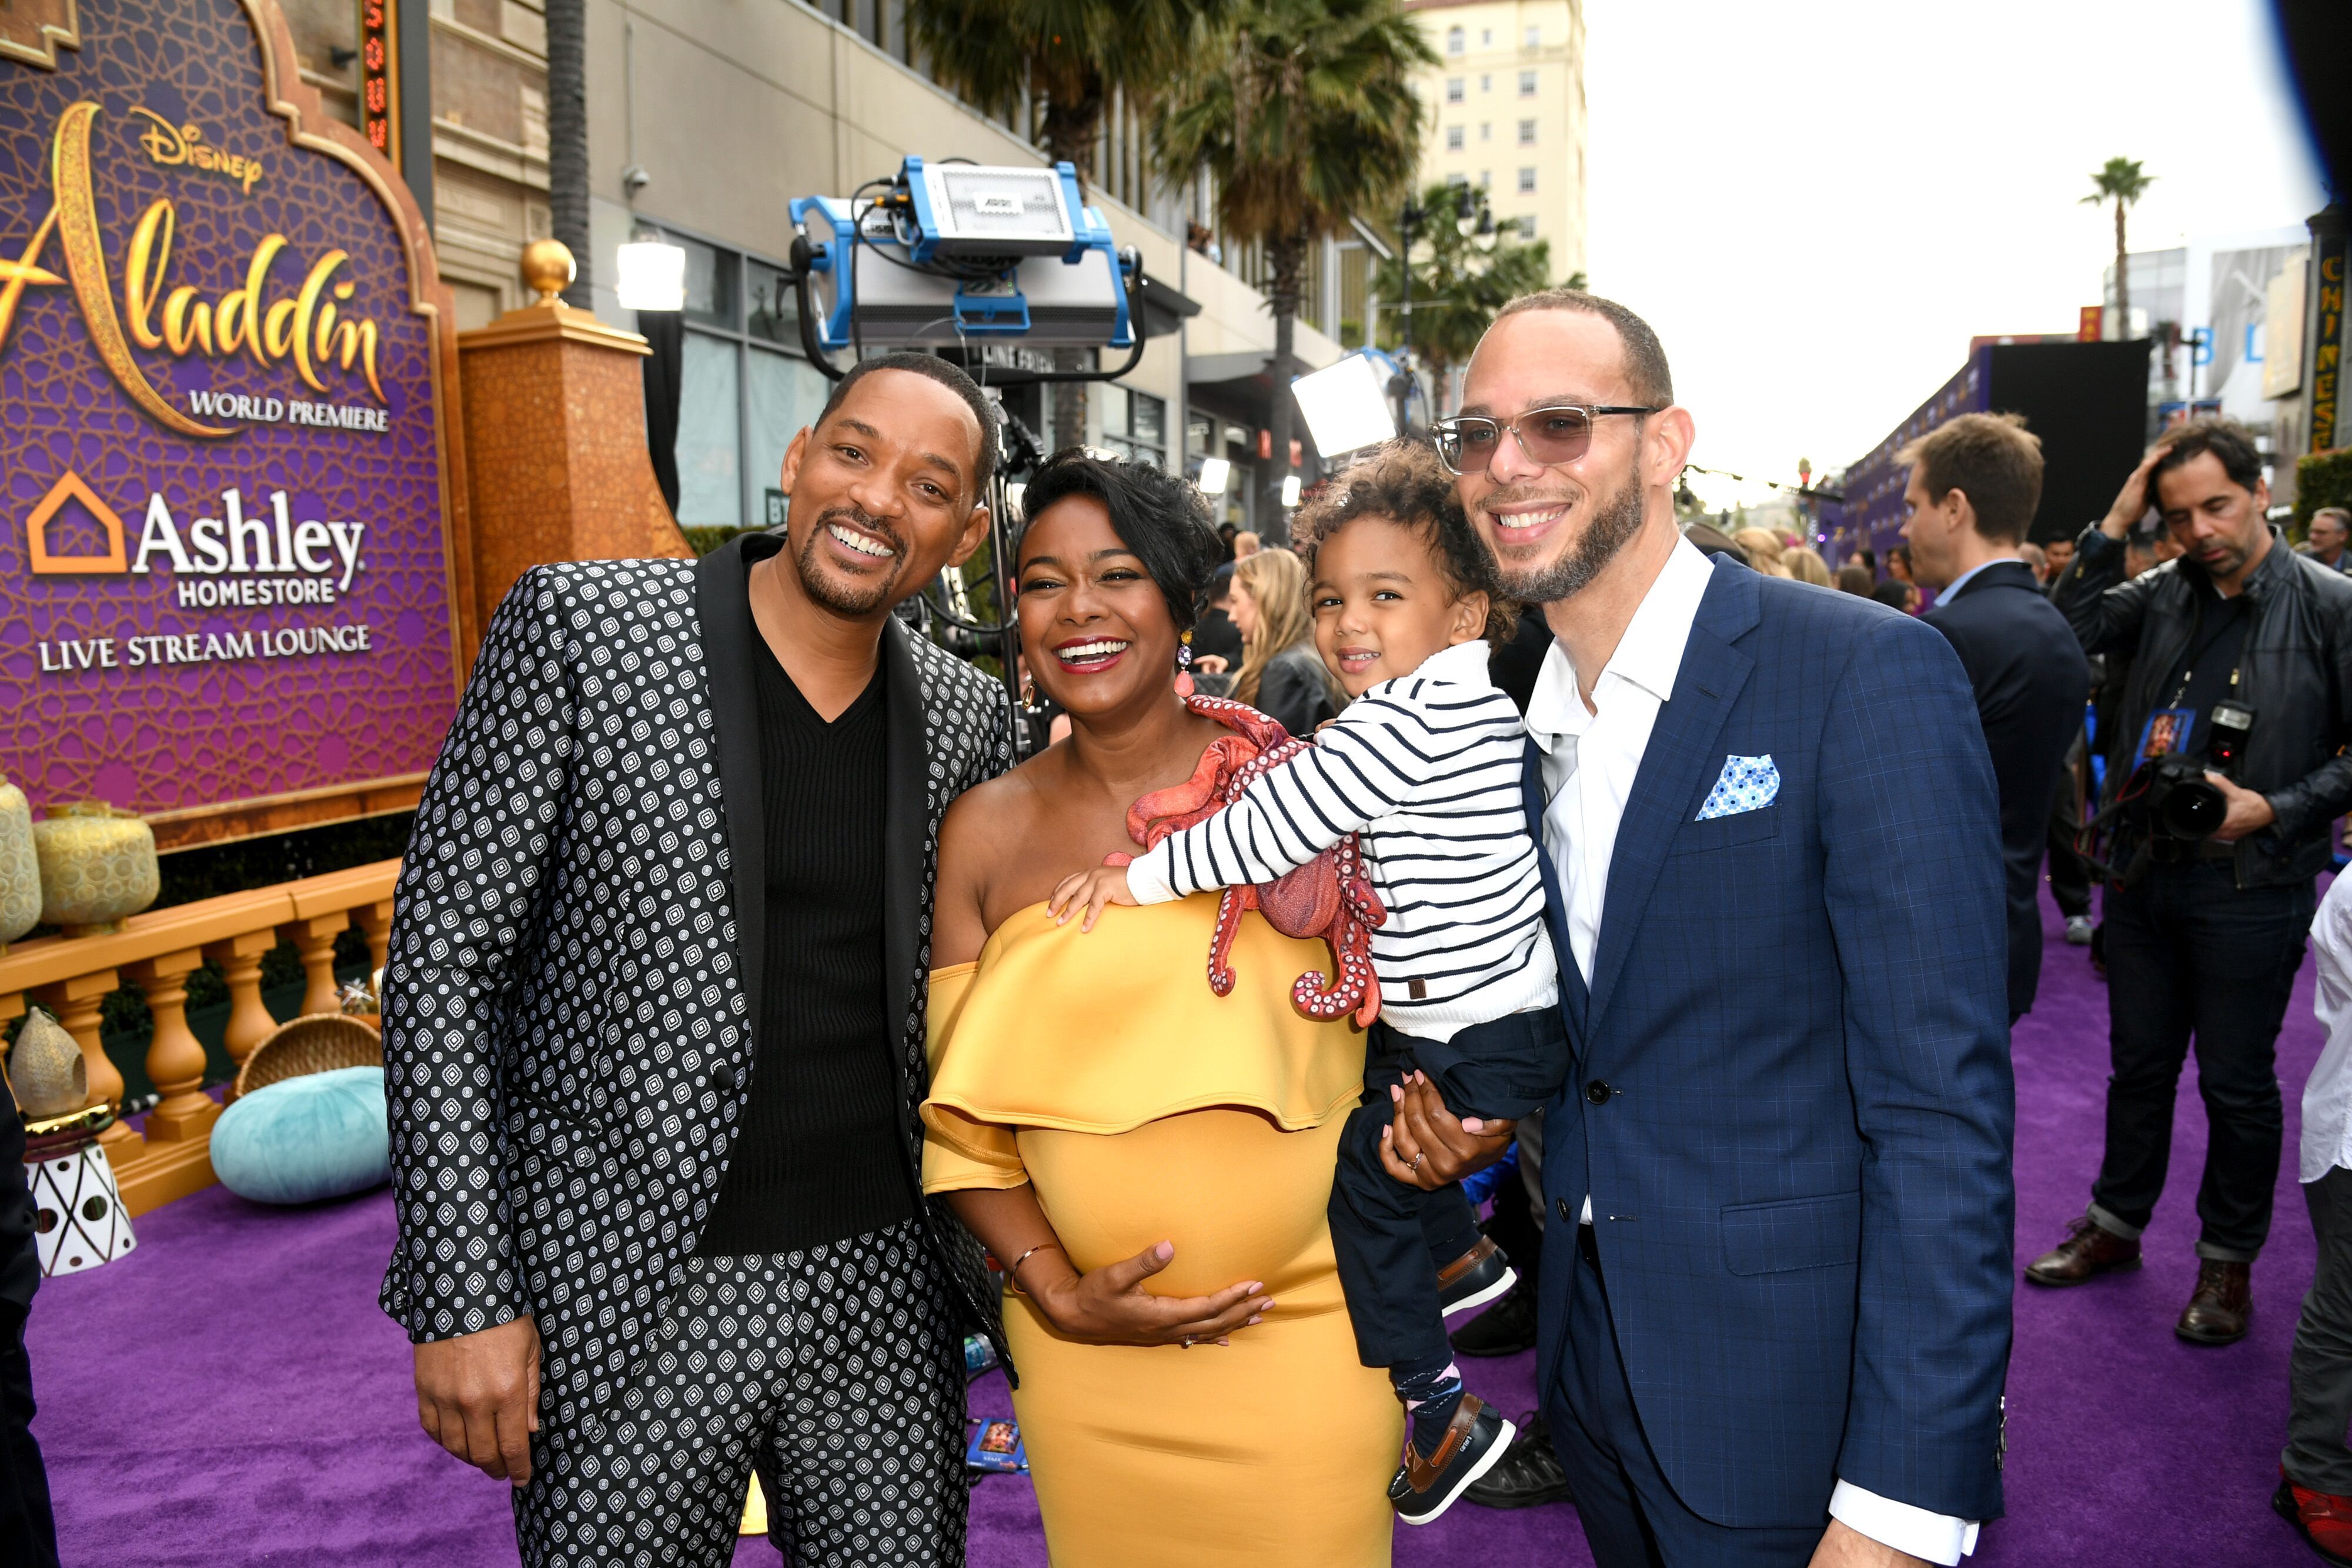 Tatyana Ali with Will SMith at the 2019 premiere of "Aladdin"| Source: Getty Images